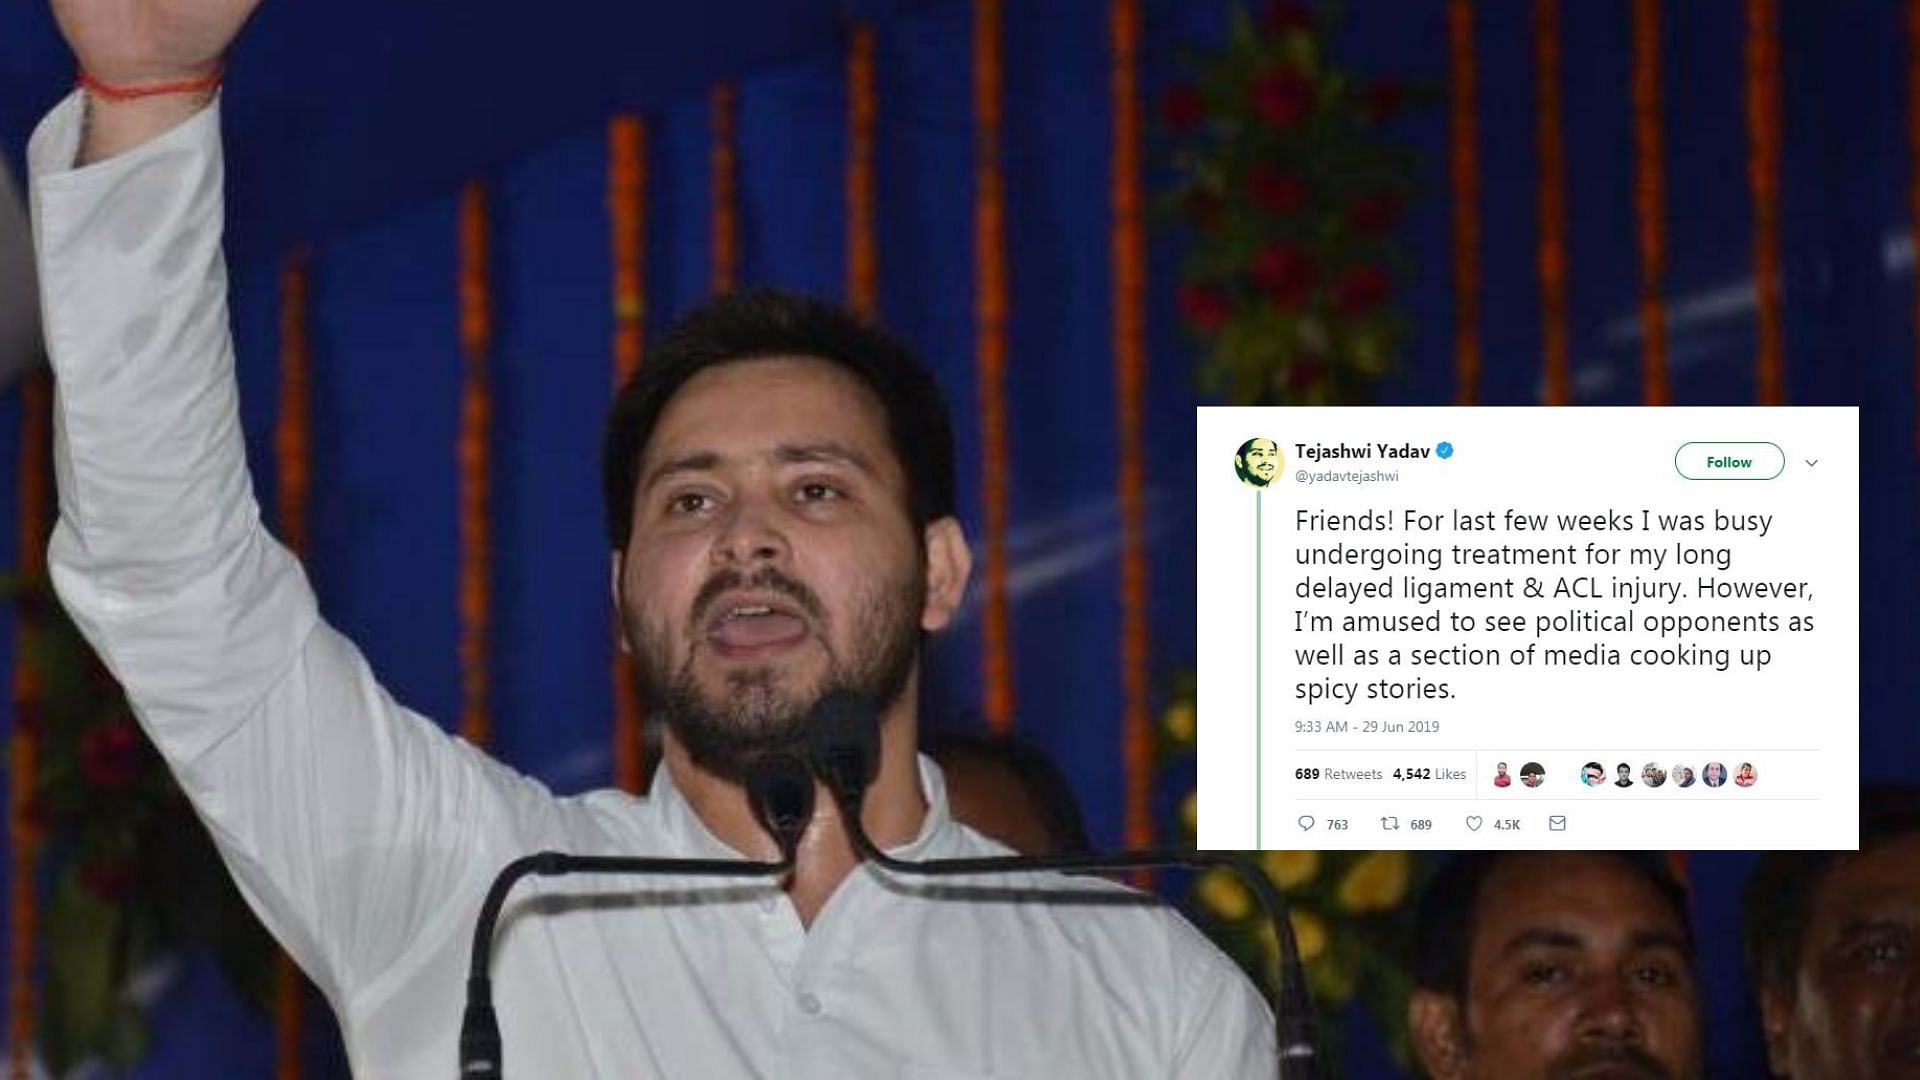 “I’m amused to see political opponents as well as a section of media cooking up spicy stories,” Tejashwi Yadav wrote on Twitter.